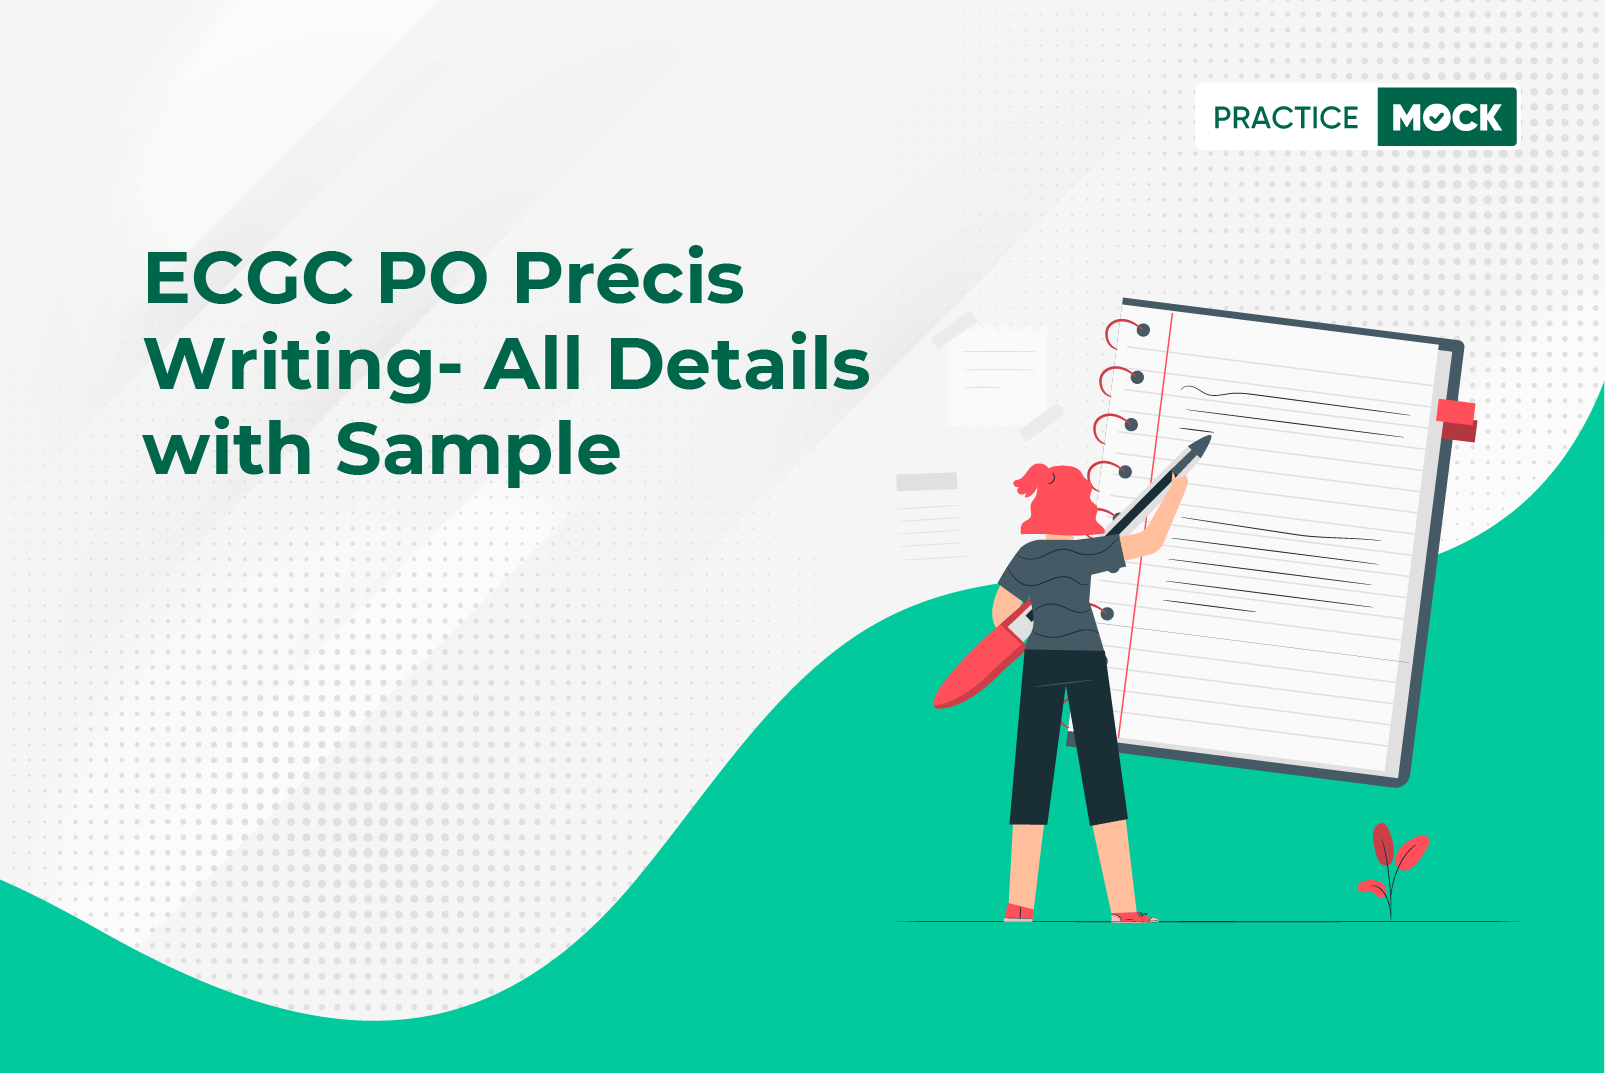 ECGC PO Précis Writing- All Details with Sample